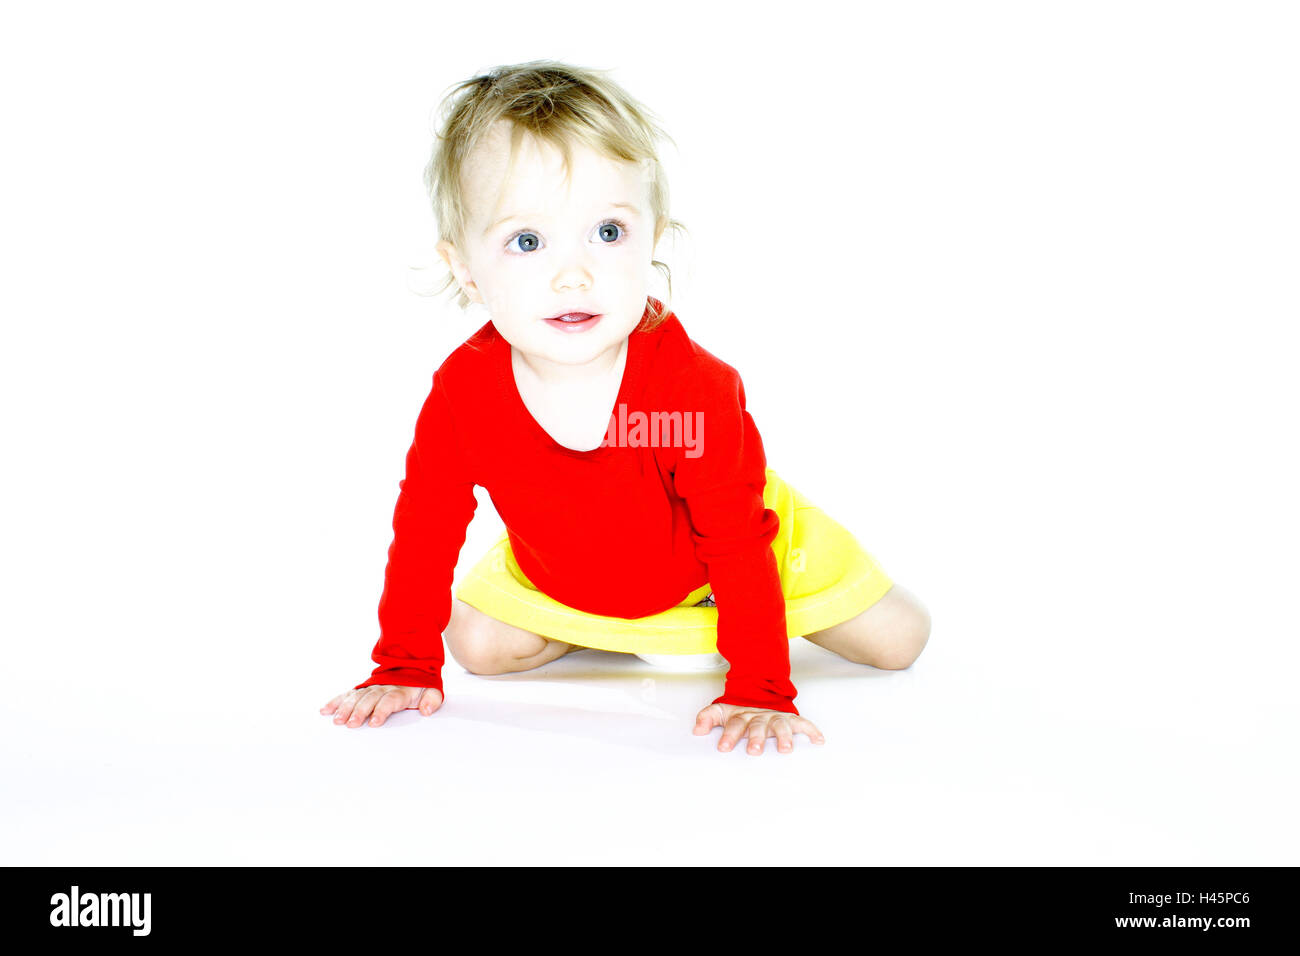 Toddler, crawls,   Child, small, girls, 1-3 years, blond, rests, kneels, cutely, wakened, development phase, development, abilities, tries out, locomotion, innocence, childhood, whole bodies, studio, free plates, series, Stock Photo